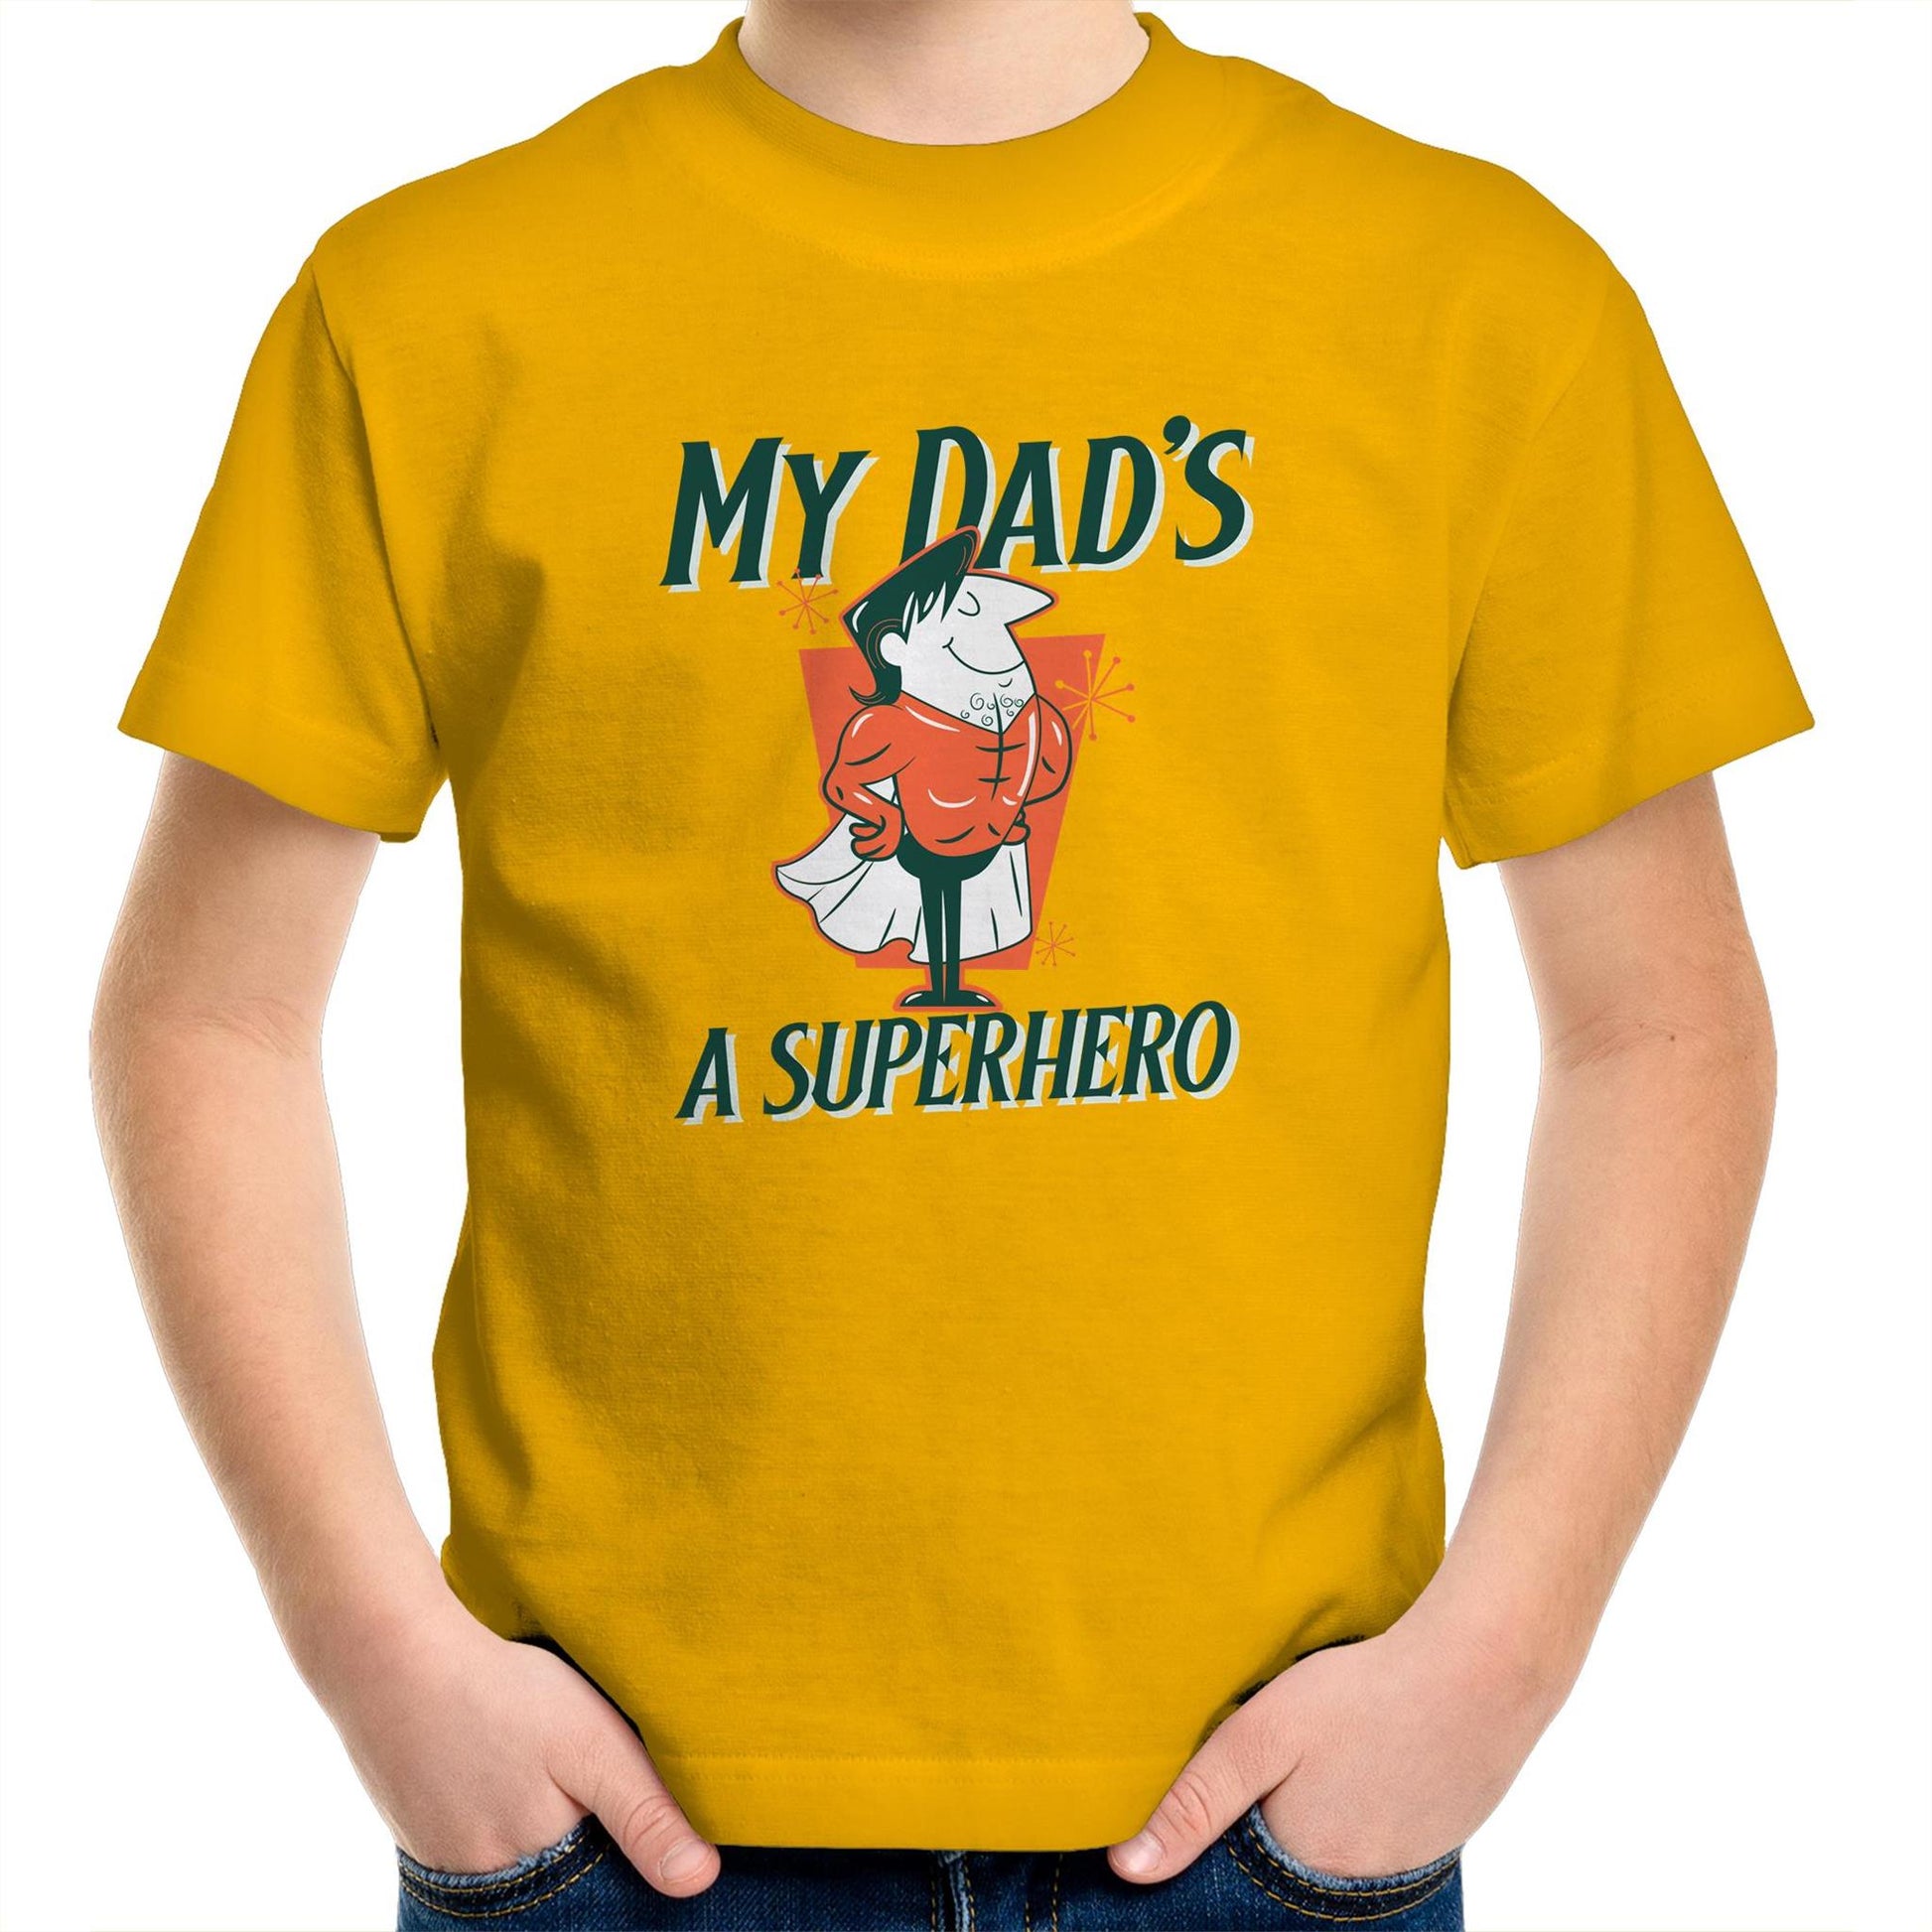 My Dad's A Superhero - Kids Youth Crew T-Shirt Gold Kids Youth T-shirt Dad